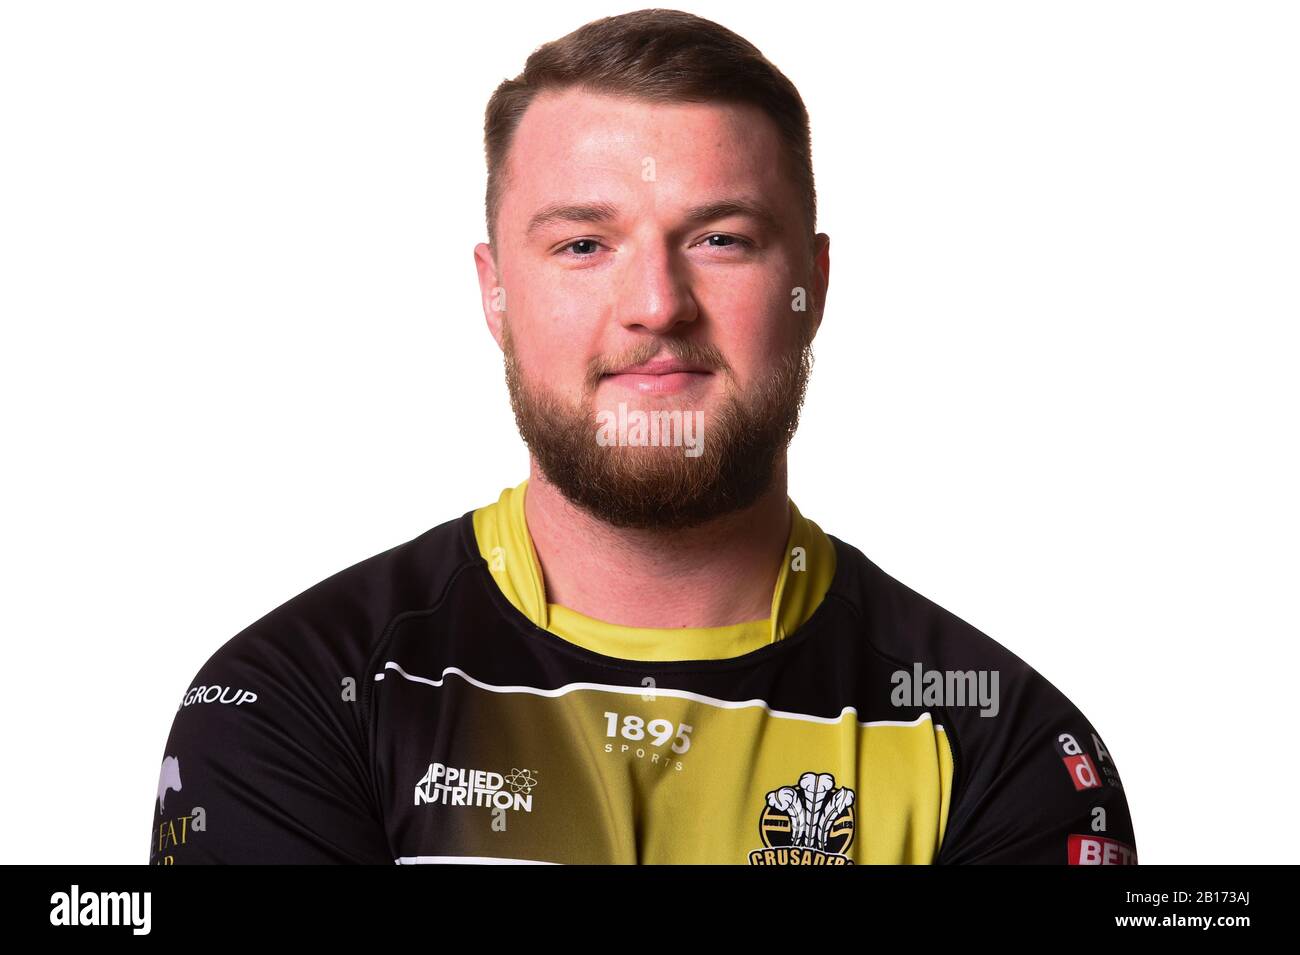 23th February 2020, Queensway Stadium, Wrexham, Wales; North Wales Crusaders, Player Profiles, Jack Cottington of North Wales Crusaders Stock Photo